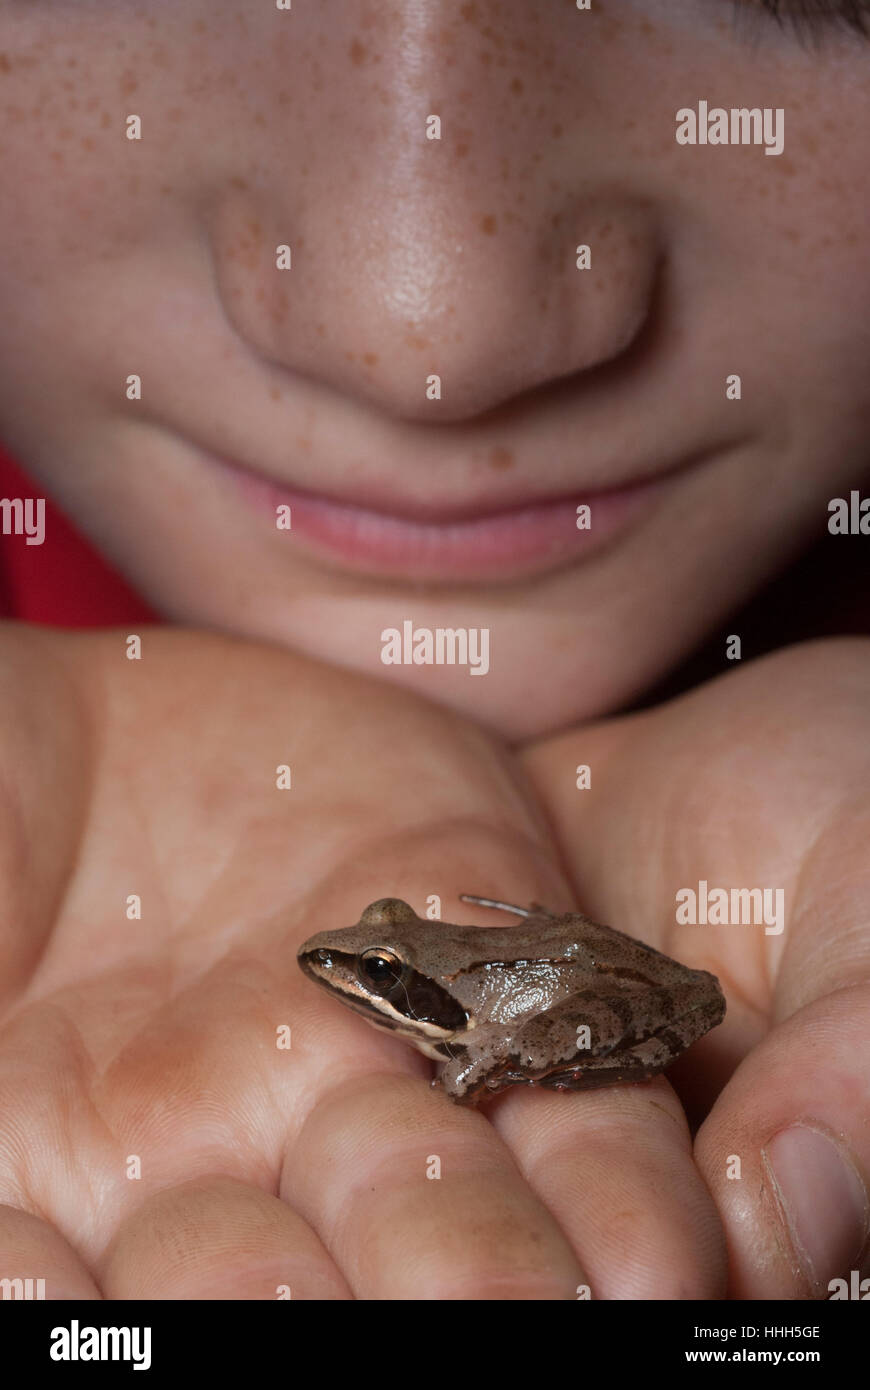 A boy inspects a little frog on his palm. Stock Photo